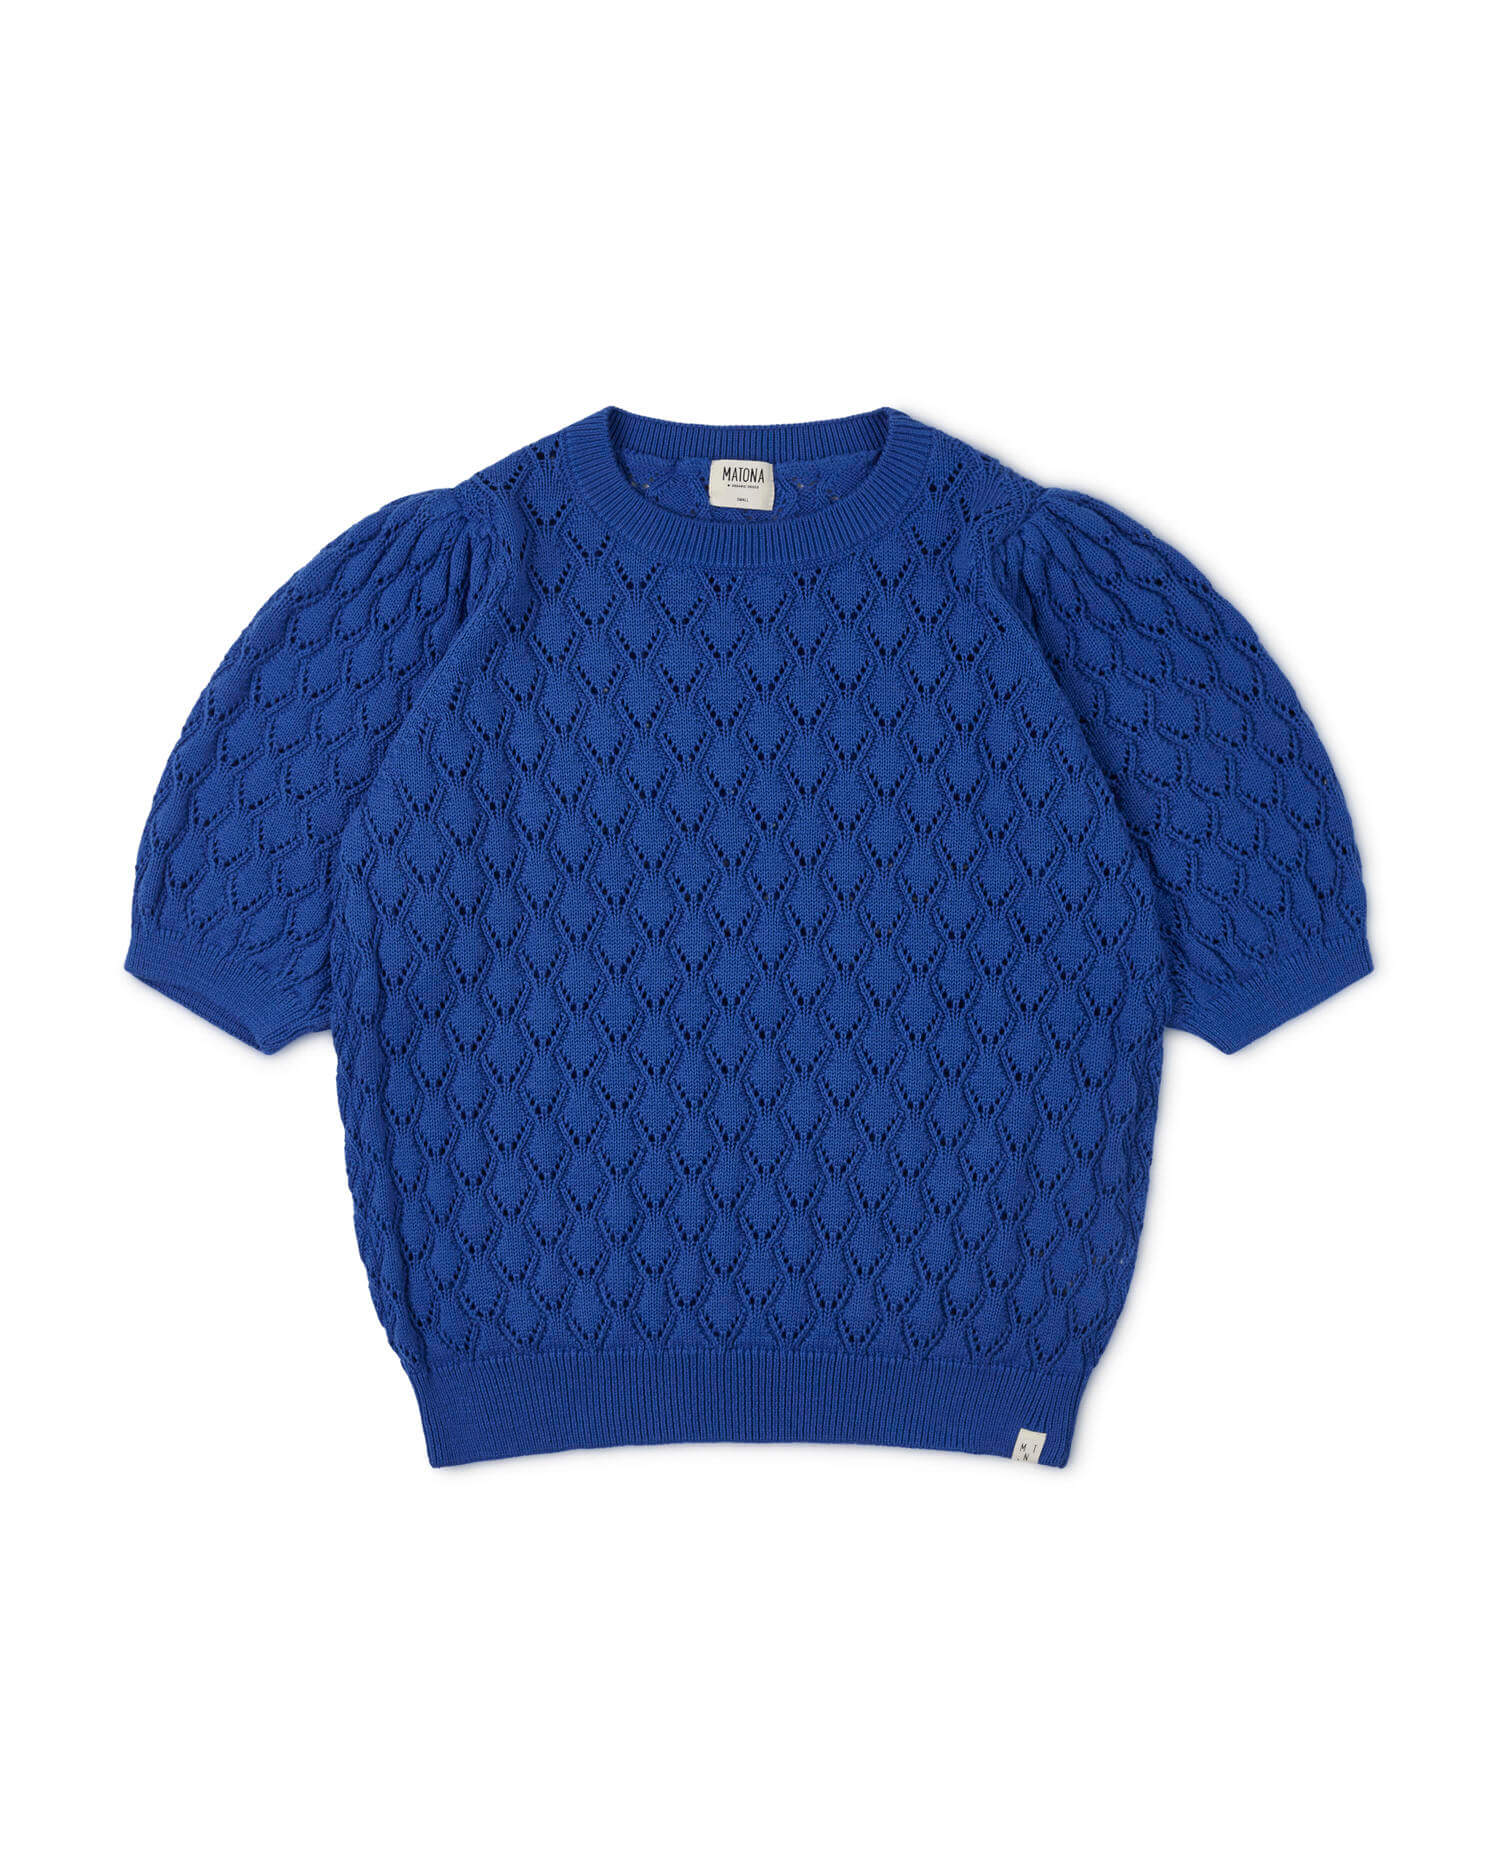 Blue, knitted blouse made of 100% organic cotton from Matona